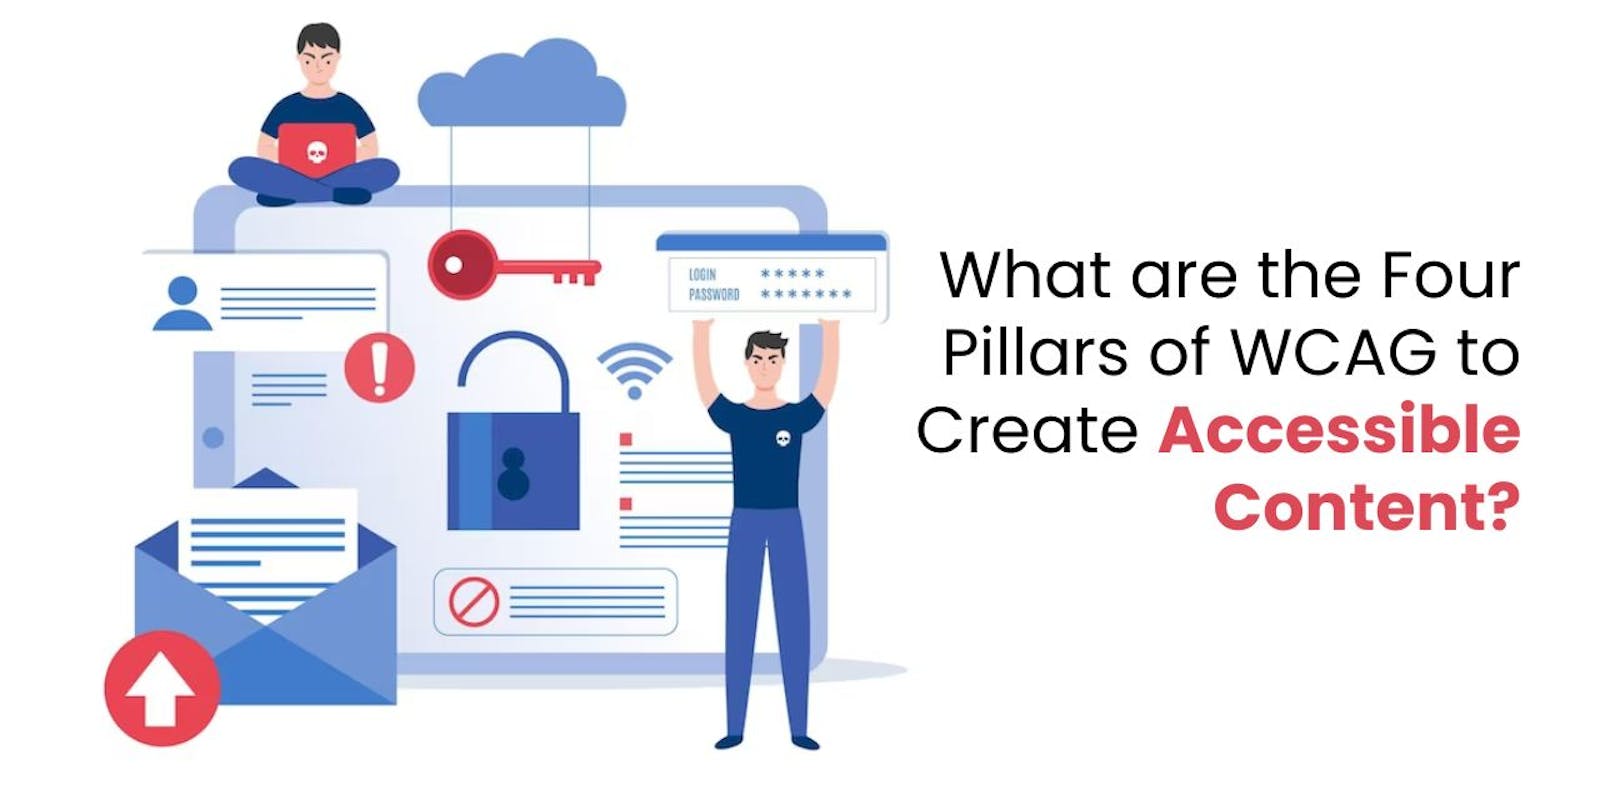 What are the Four Pillars of WCAG to Create Accessible Content?